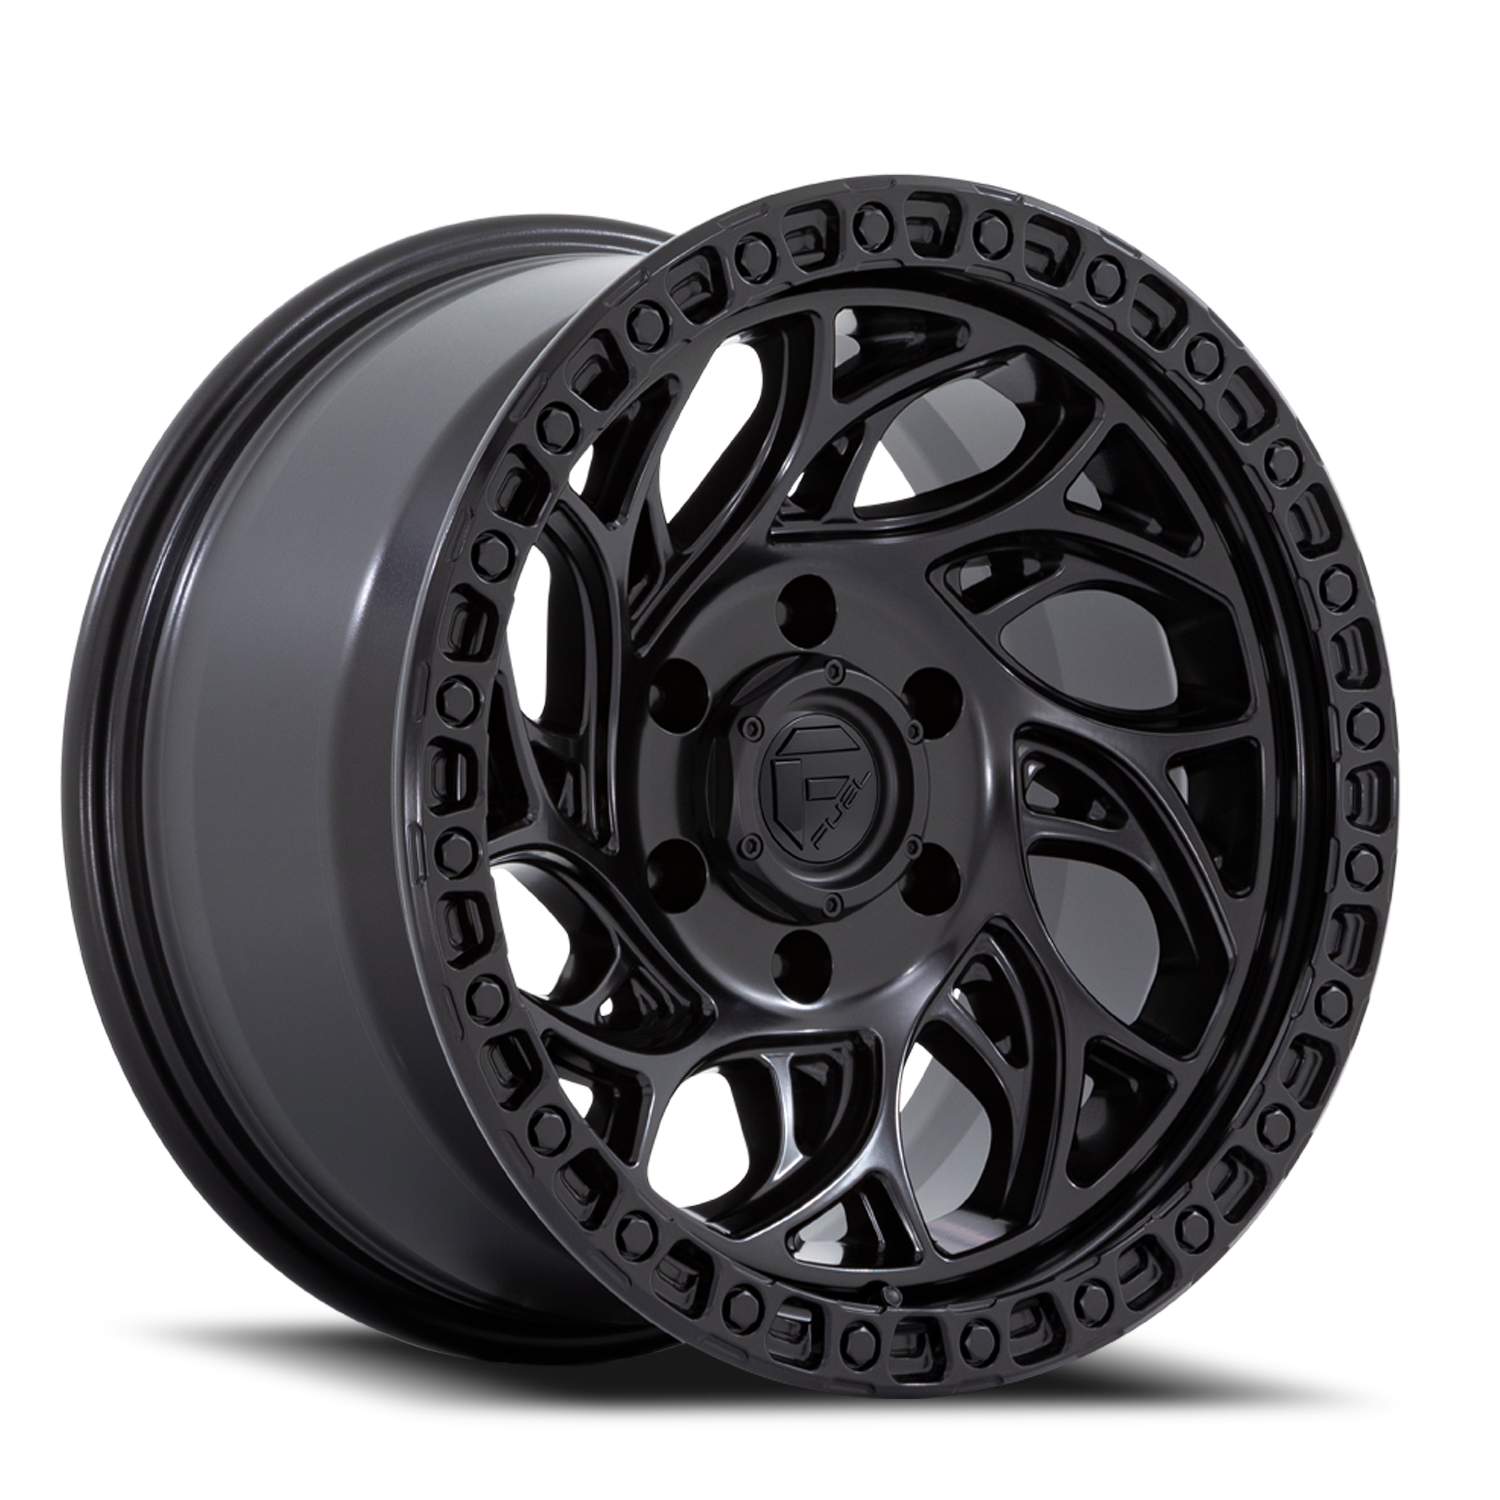 Aluminum Wheels 20X9 Runner OR D852 6 On 135 Blackout 87.1 Bore 20 Offset Fuel Off Road Wheels